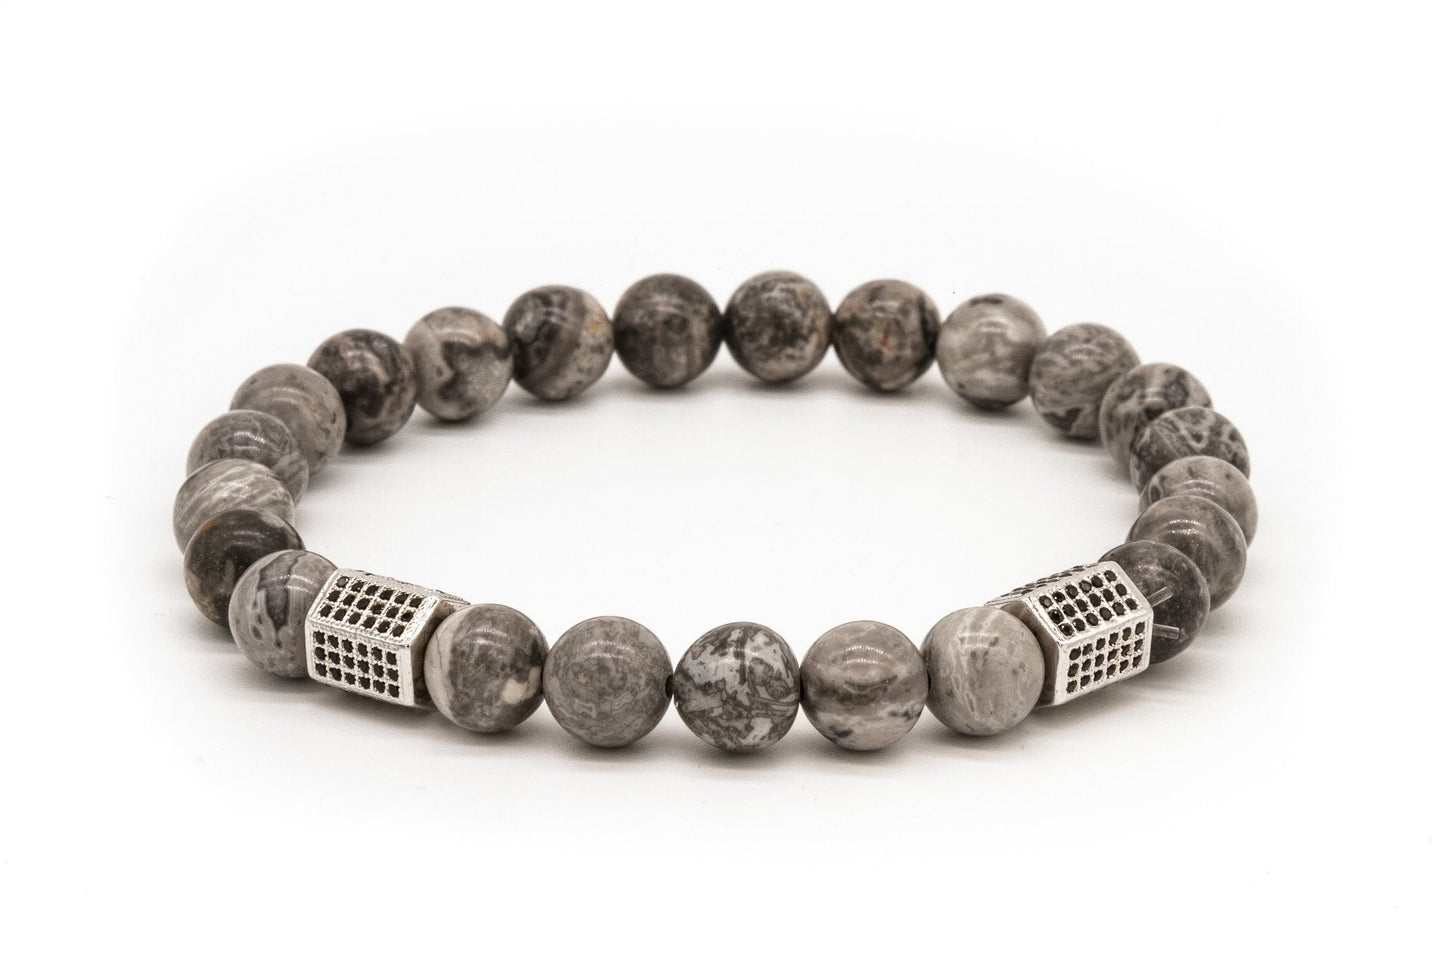 UNCOMMON Men's Beads Bracelet Two Silver Jeweled Chest Charms Grey Jasper Beads